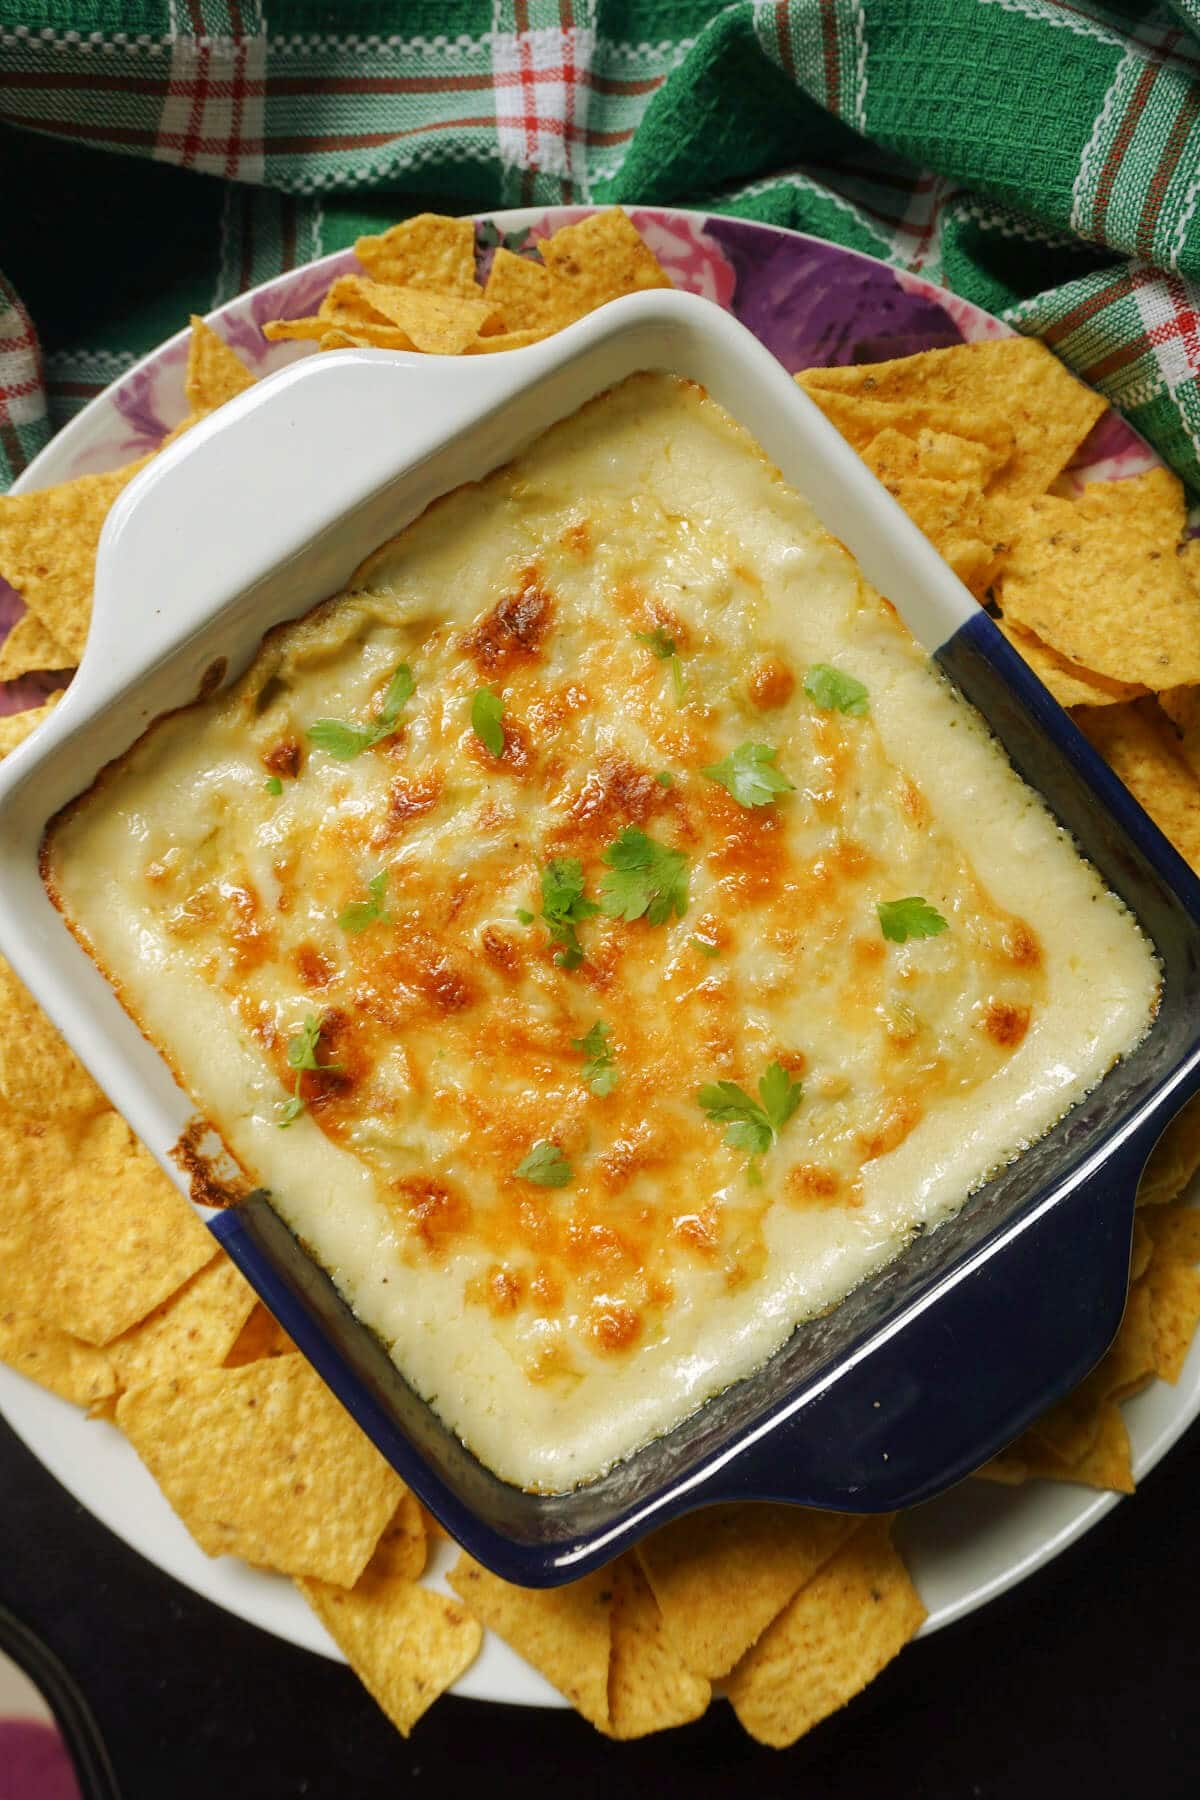 Overhead shoot of a dish with artichoke dip and nachos around